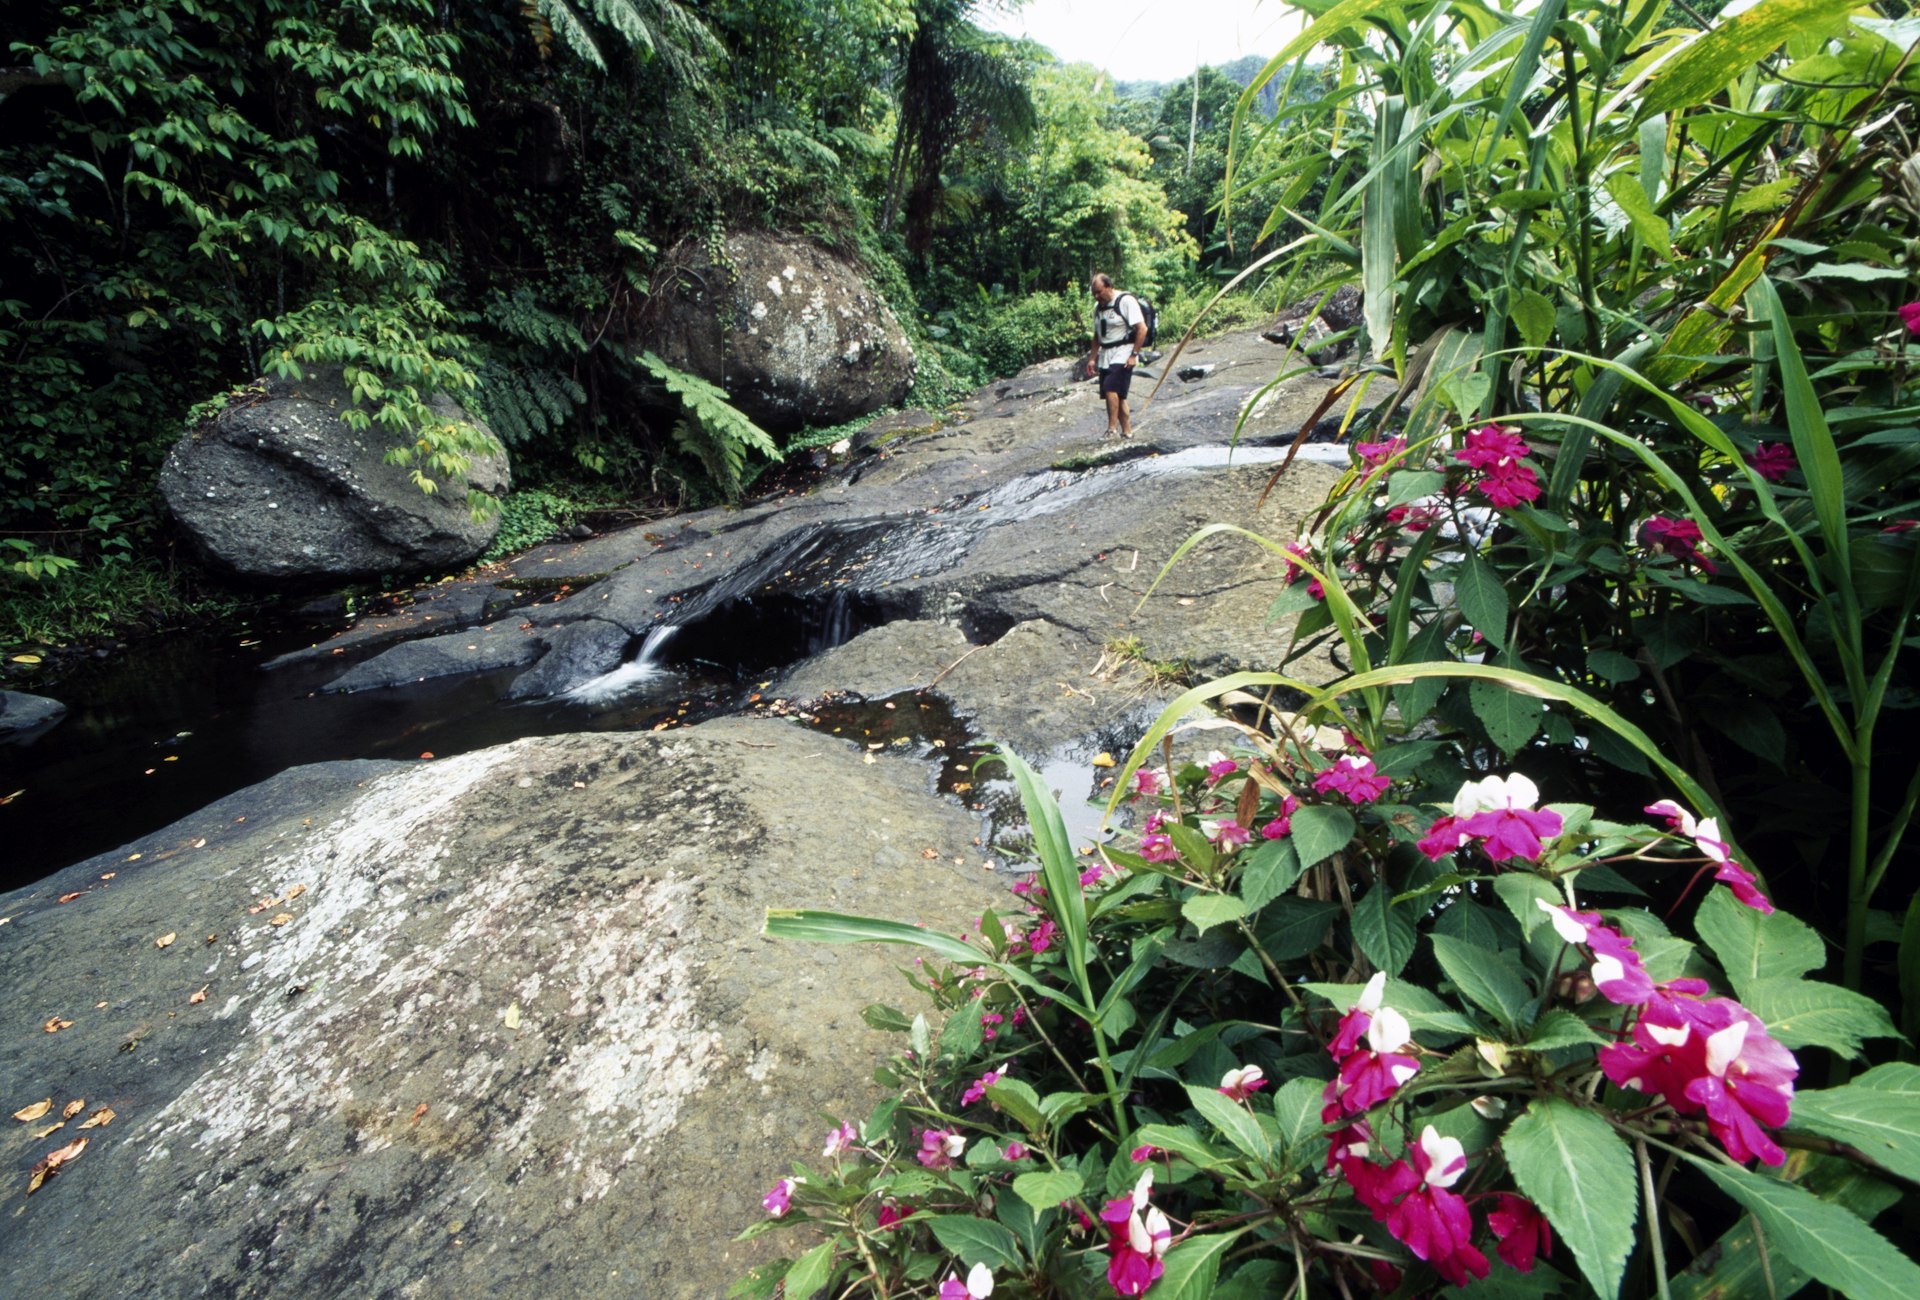 A hiker stops on a rocky stretch of a trail with pink flowers in the foreground at Koroyanitu National Heritage Park, Fiji